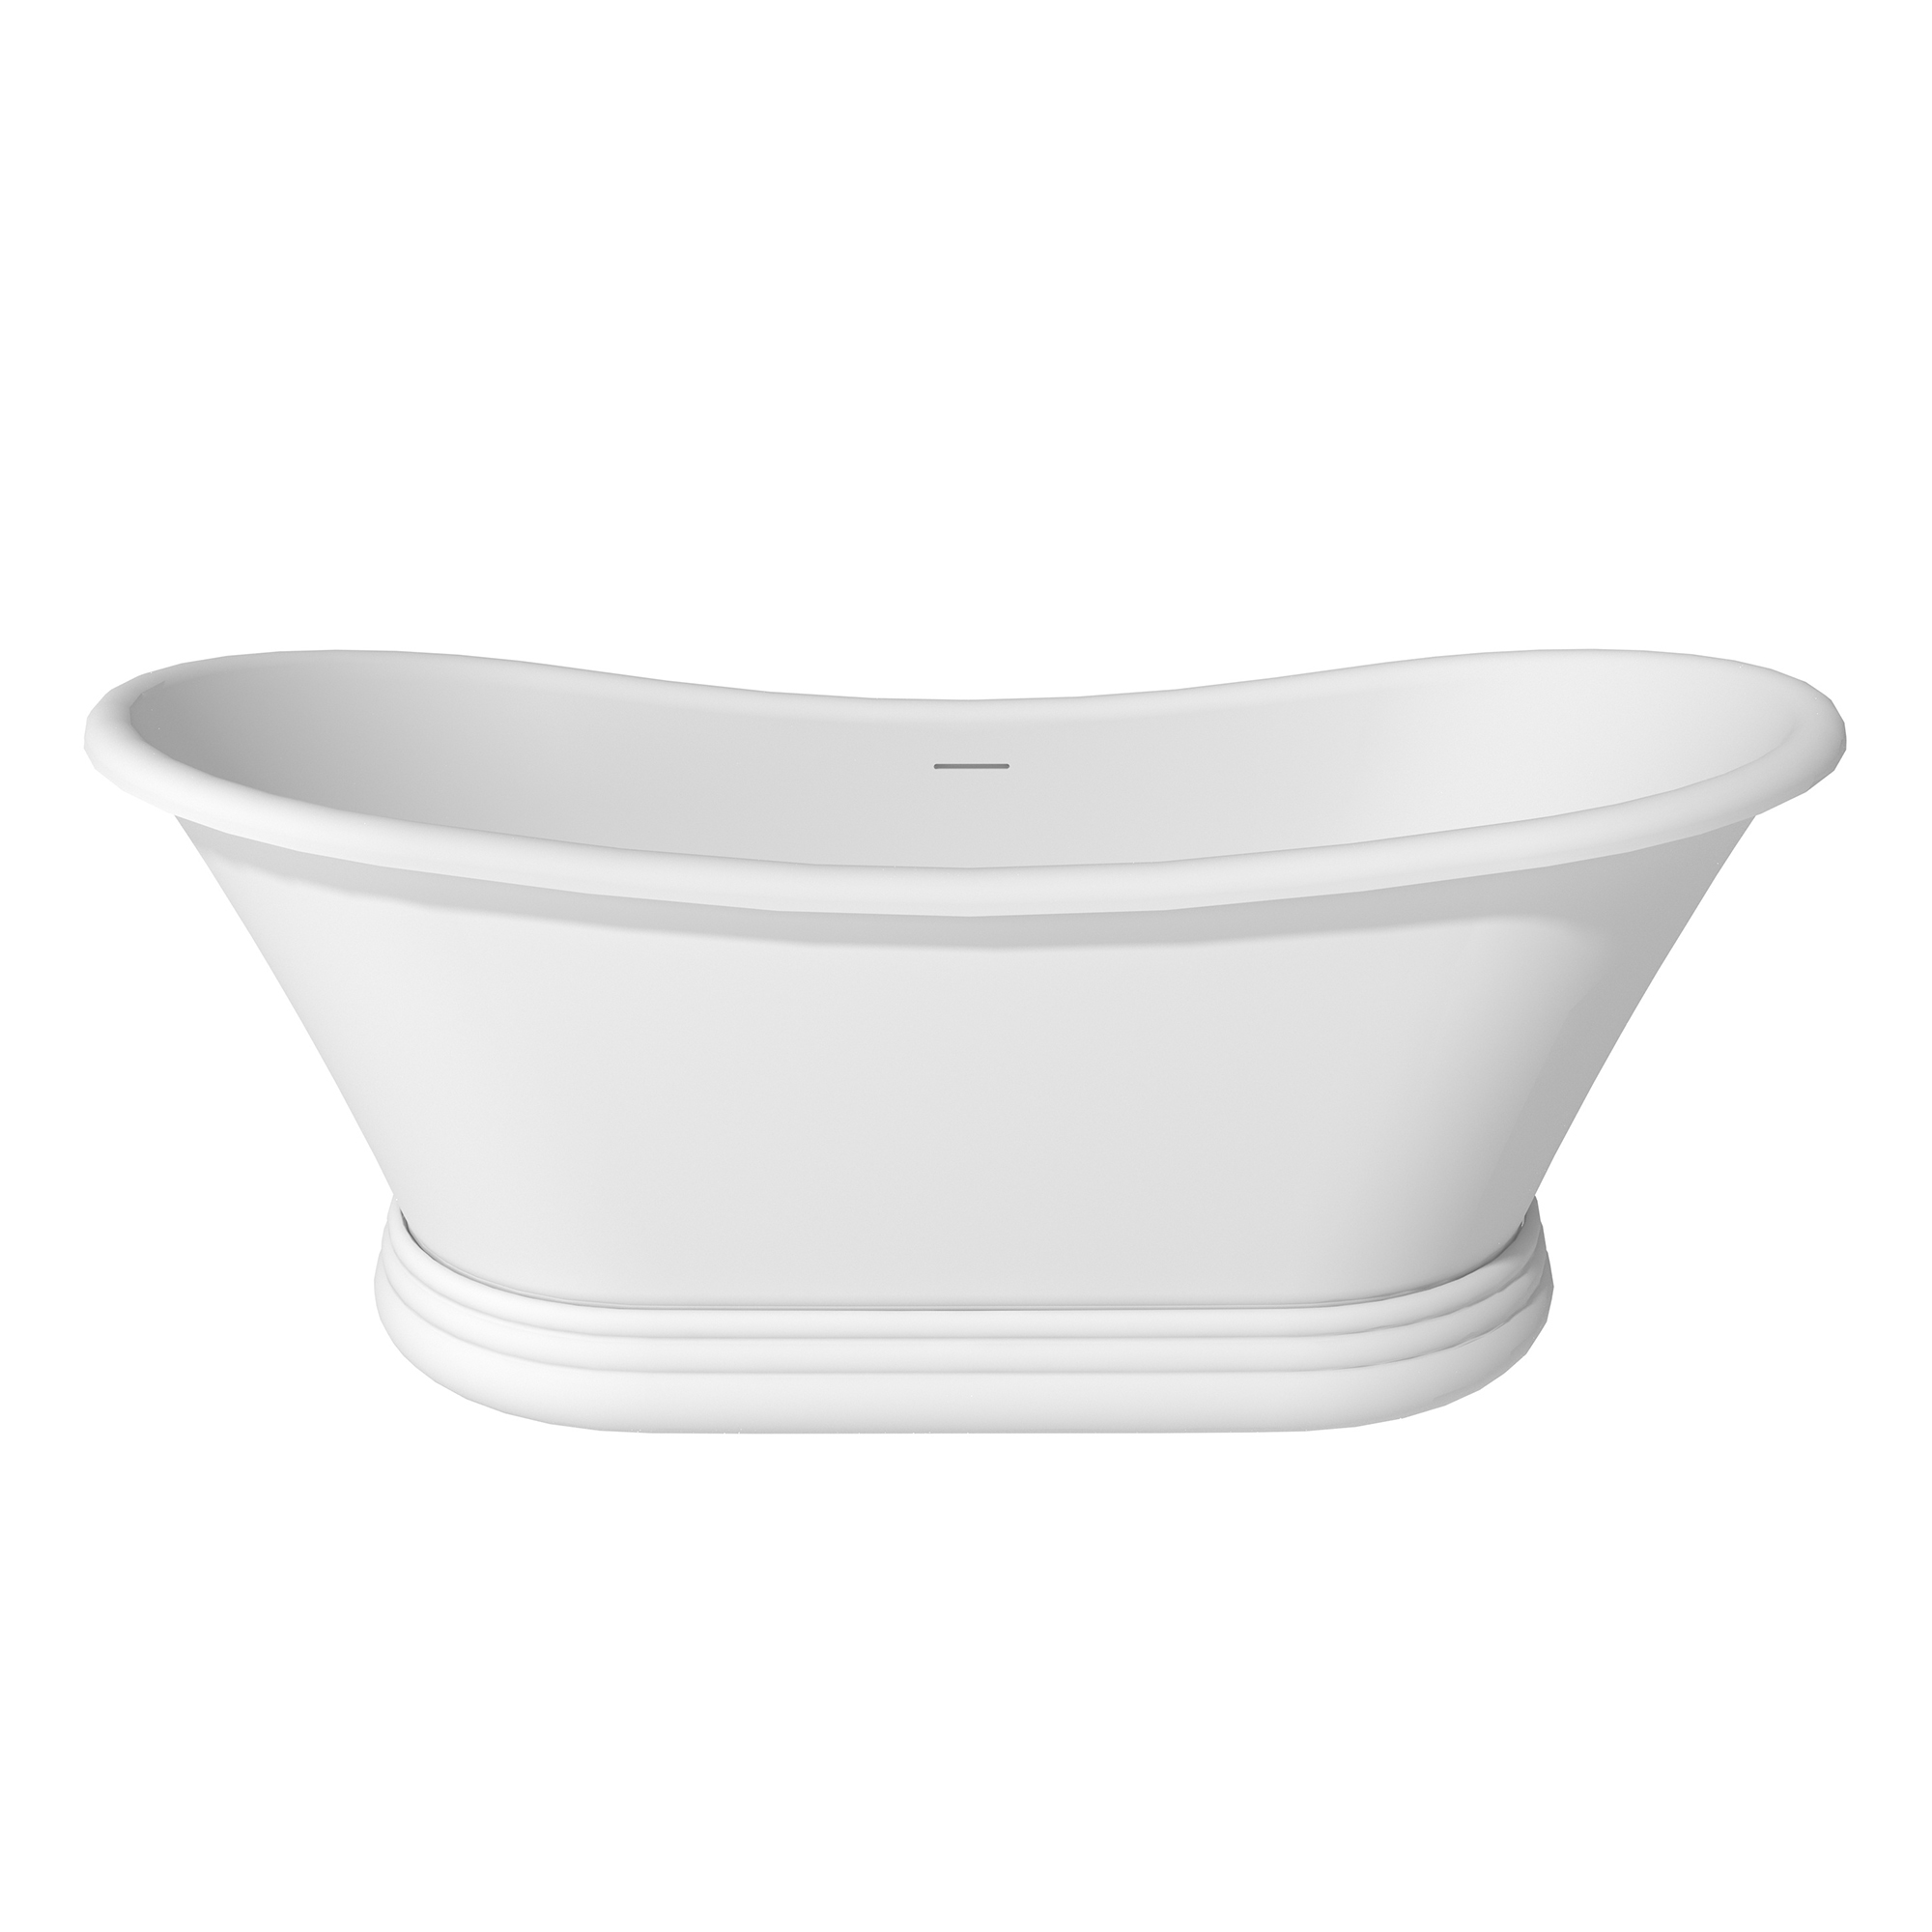 67" Freestanding Solid Surface Stone Bathtub - Matte White Finish, Center Drain, cUPc Certified, Double-Ended High-Back Design(With/without Tub Filler)